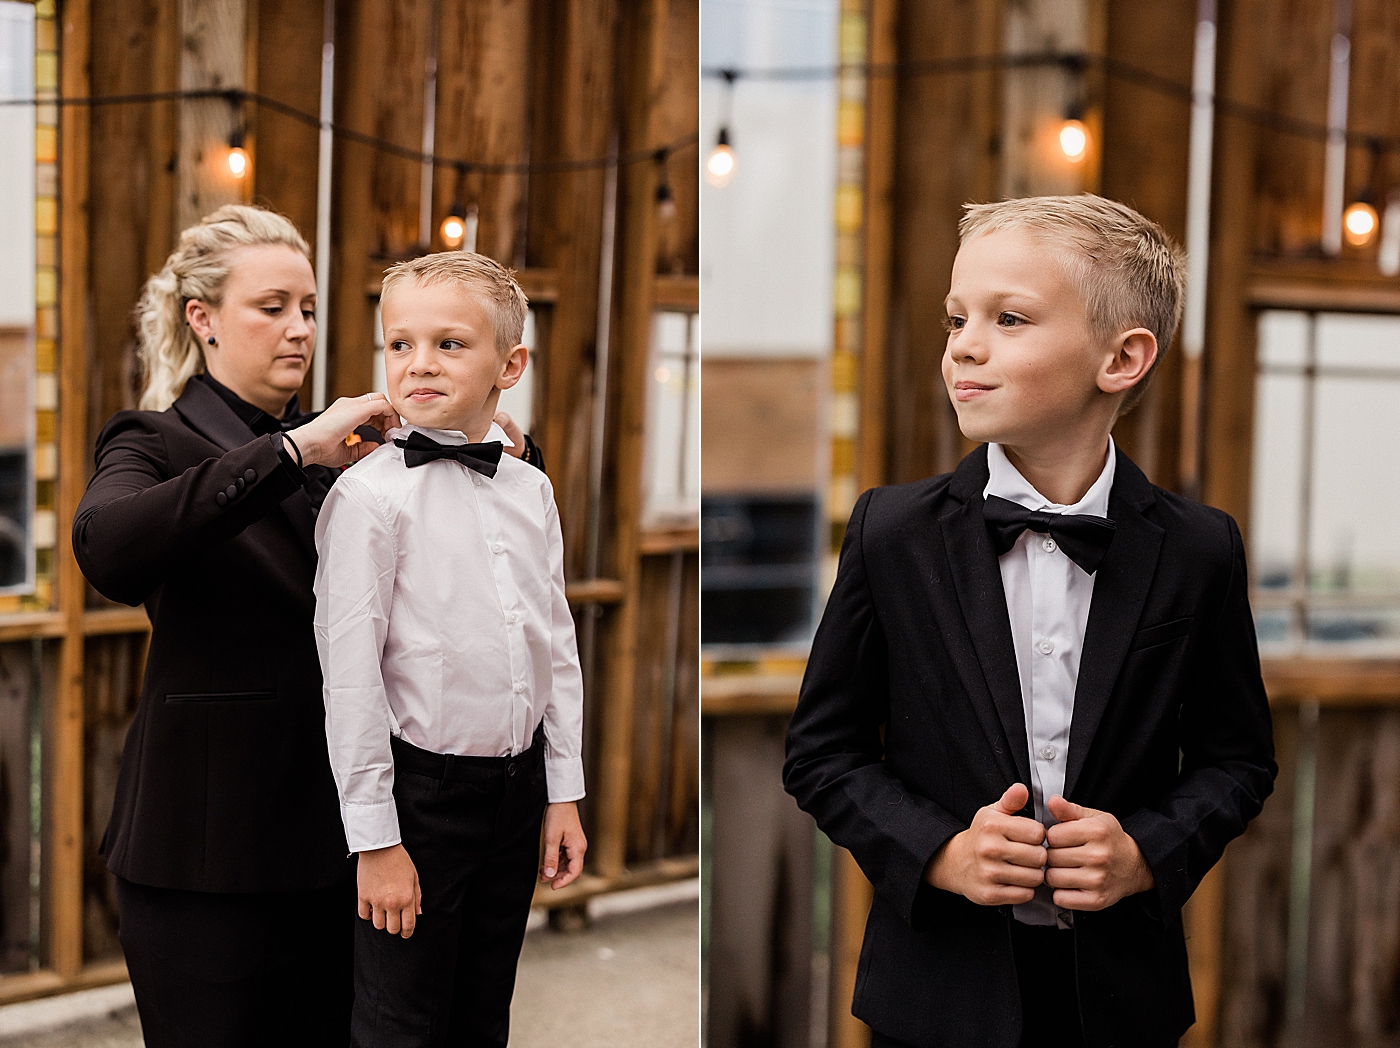 Mom getting son ready for wedding. Photo by Megan Montalvo Photography.